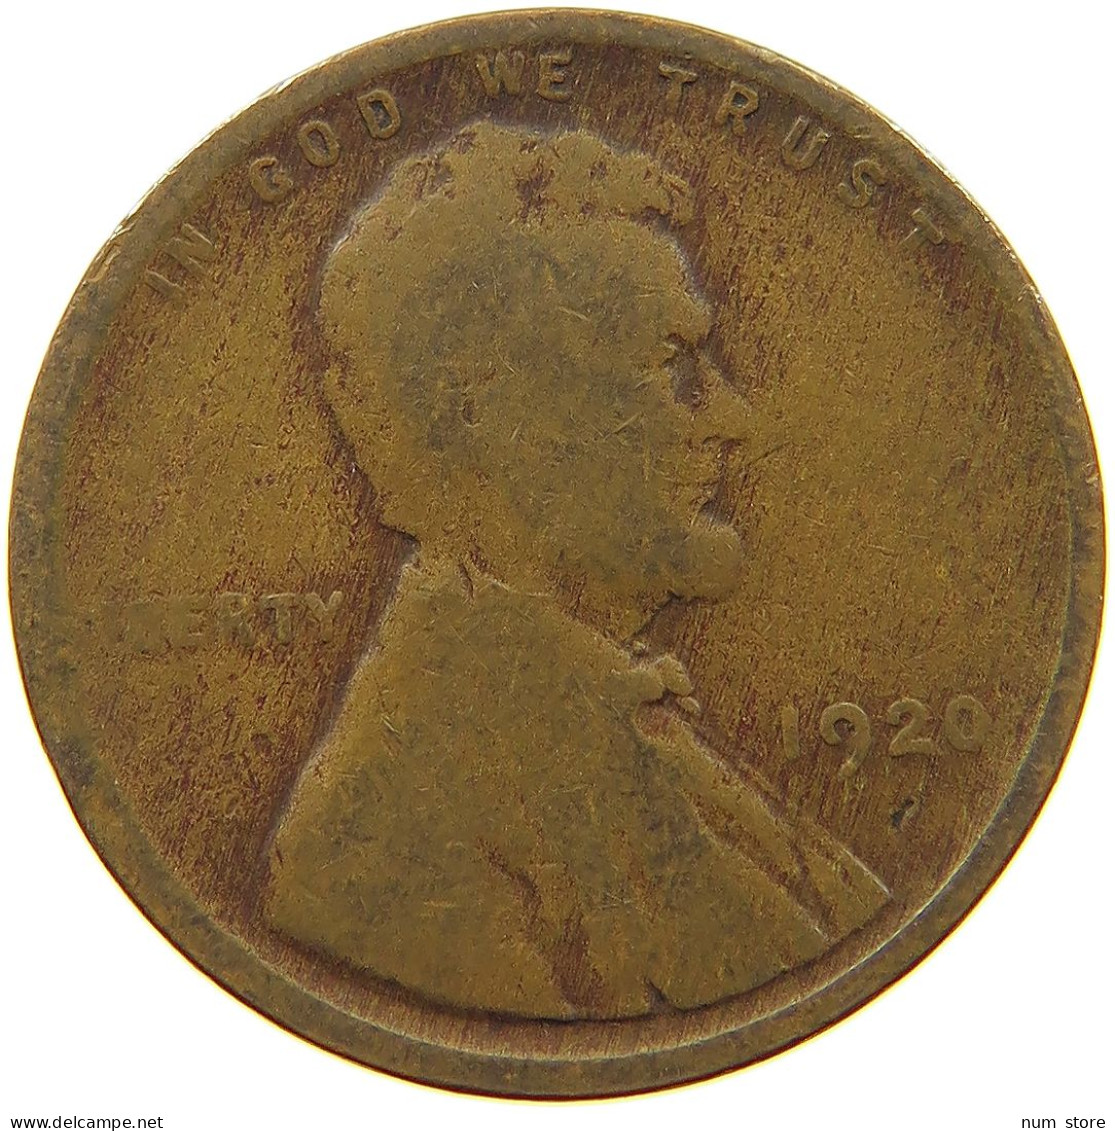 UNITED STATES OF AMERICA CENT 1920 LINCOLN WHEAT #s063 0157 - 1909-1958: Lincoln, Wheat Ears Reverse